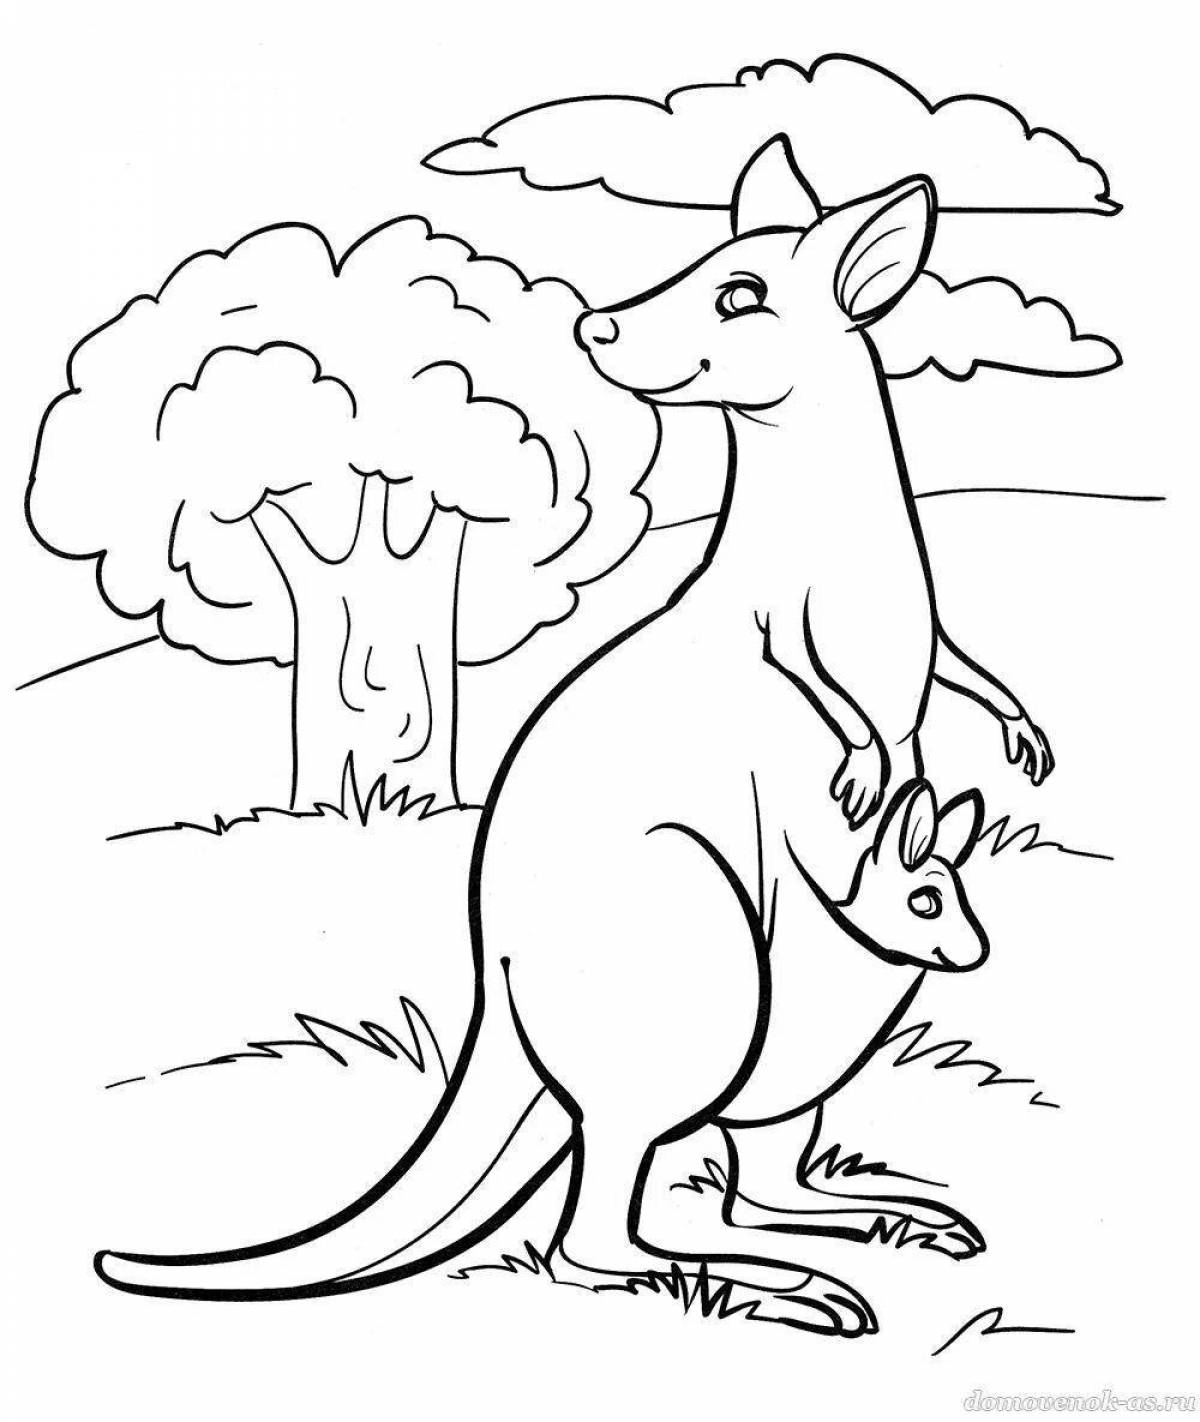 Colorful Australian animal coloring pages for preschoolers